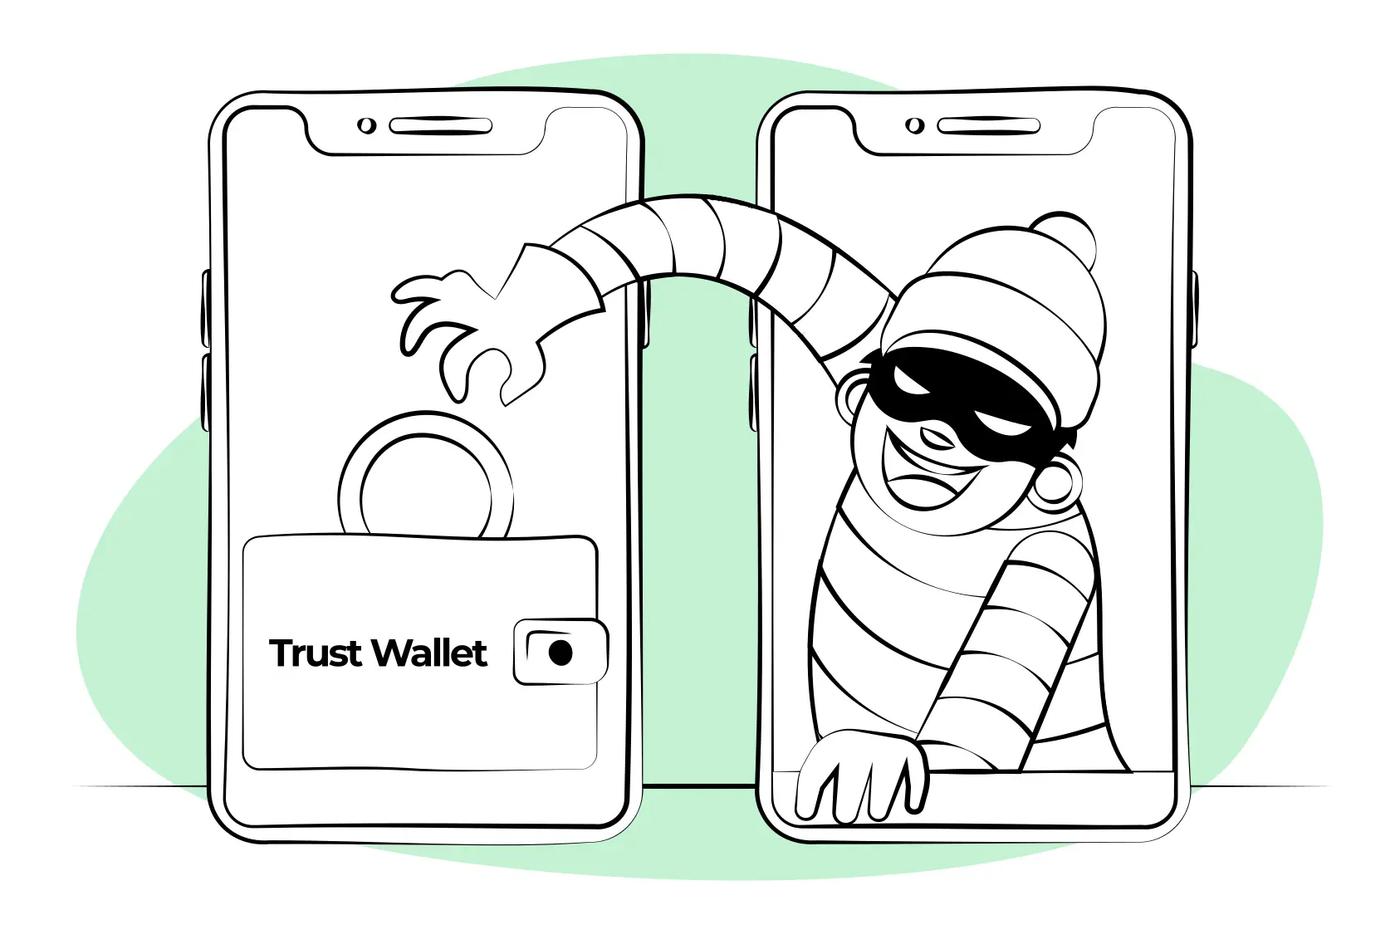 Illustration of two phones with a person in a black mask reaching out from one phone to the other, trying to grab a bag labeled 'Trust Wallet'